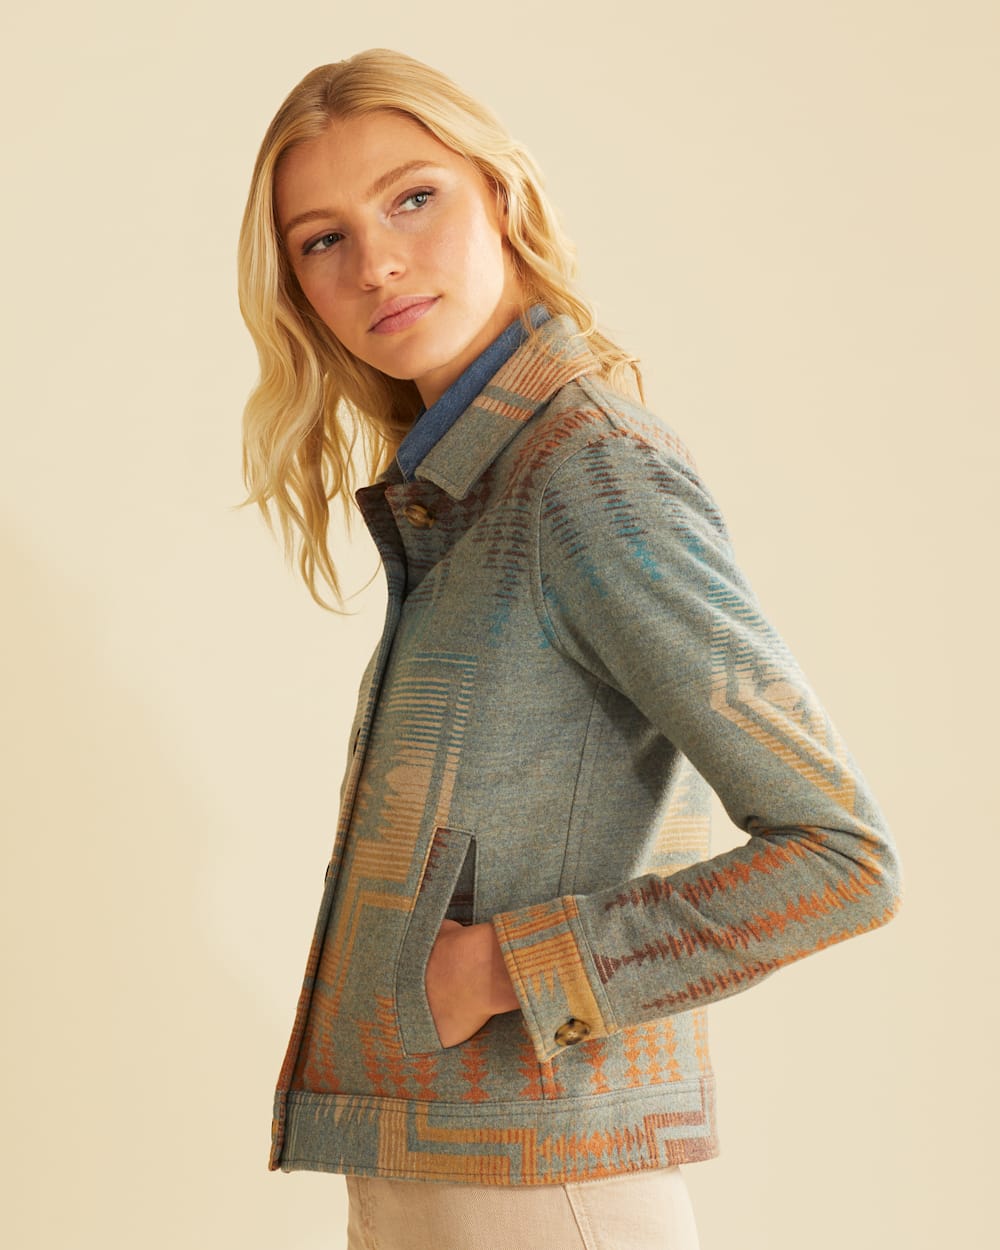 ALTERNATE VIEW OF WOMEN'S WOOL WILLA JACKET IN SHALE MIX HARDING image number 4